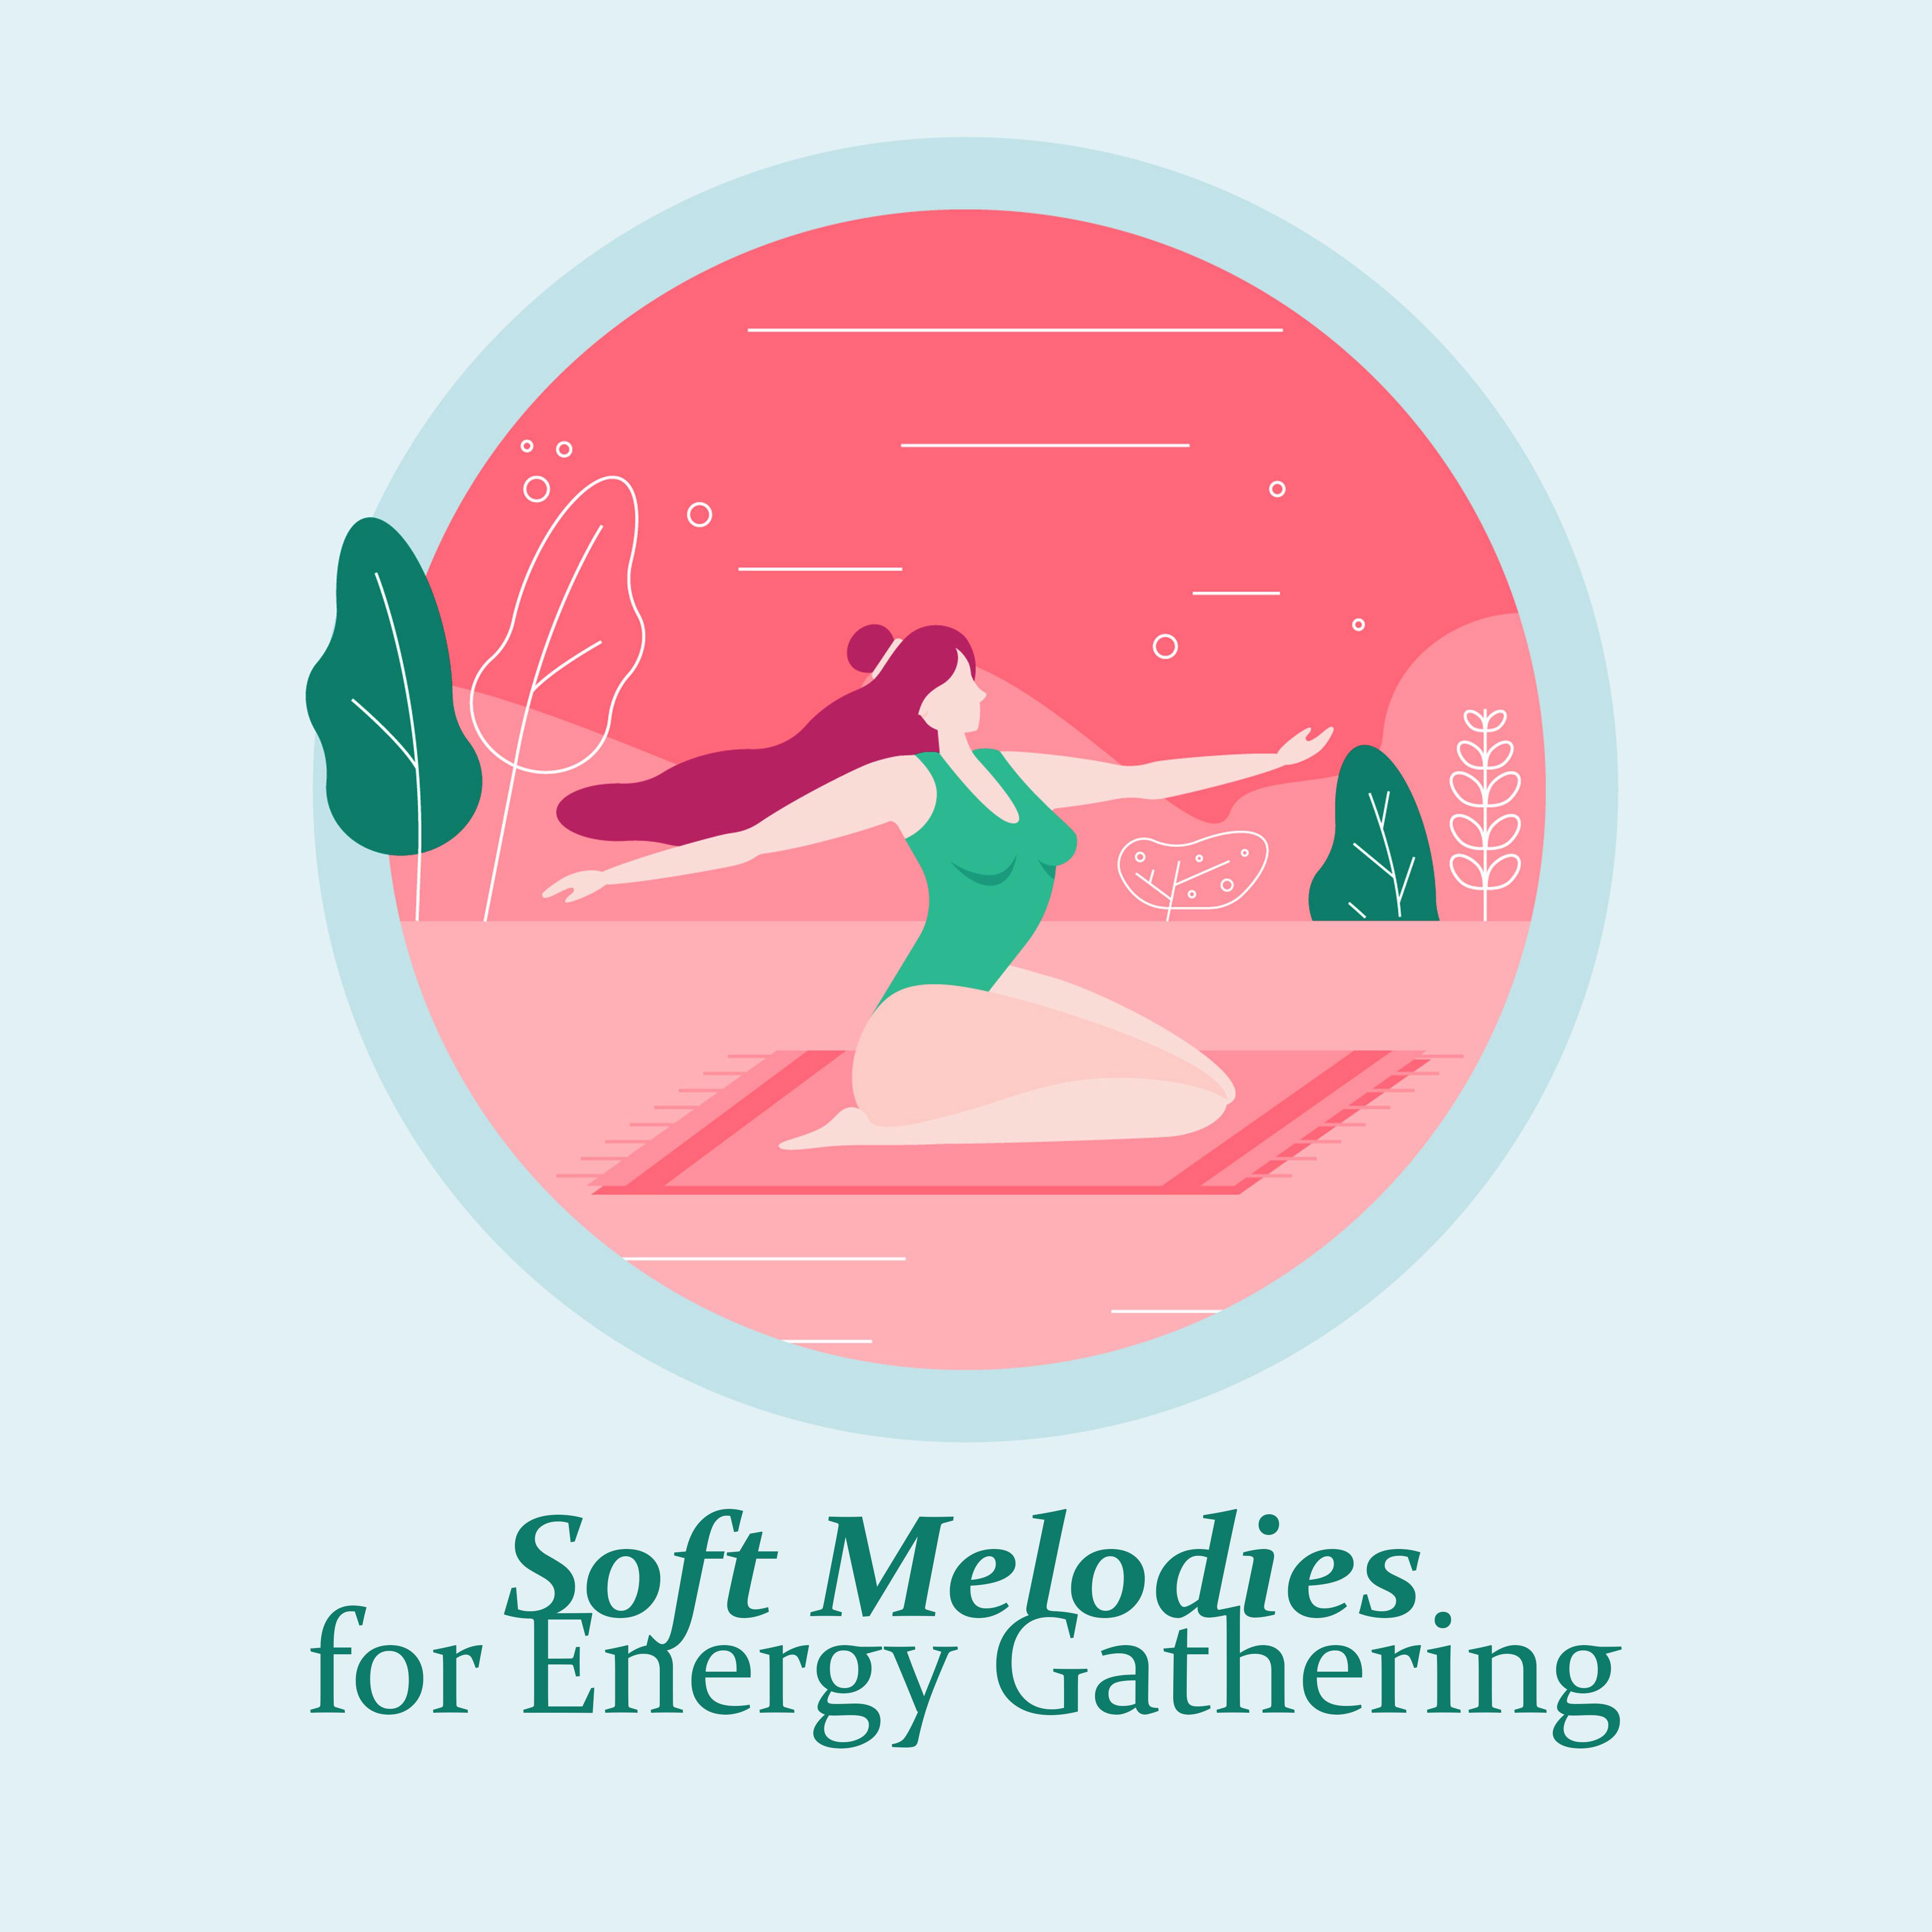 Soft Melodies for Energy Gathering